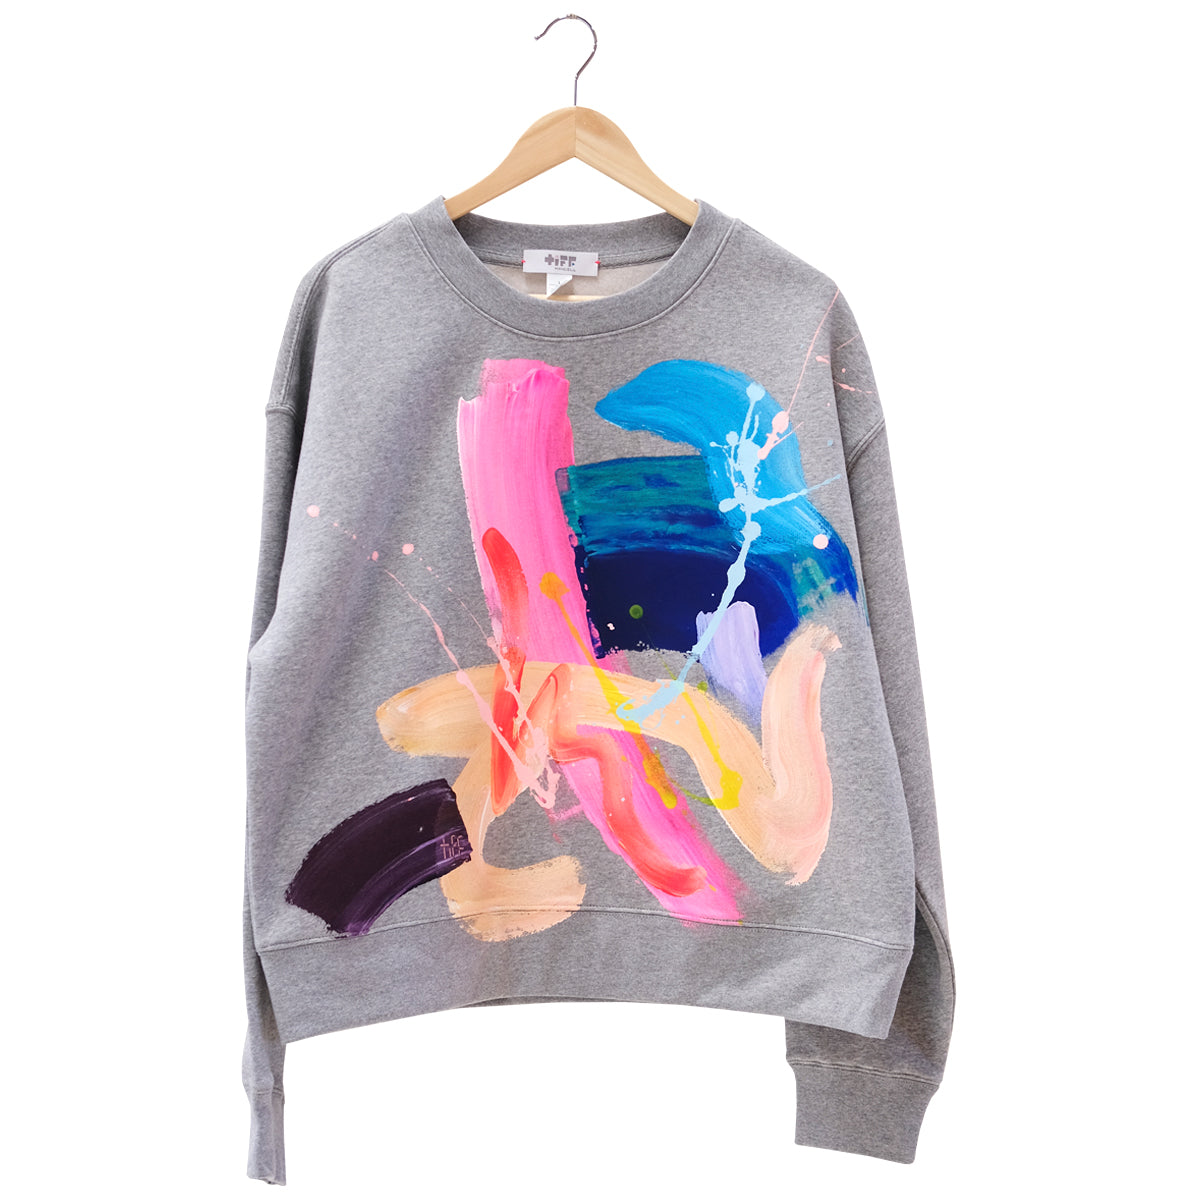 Fanciful | Crew Neck Size Large - Tiff Manuell